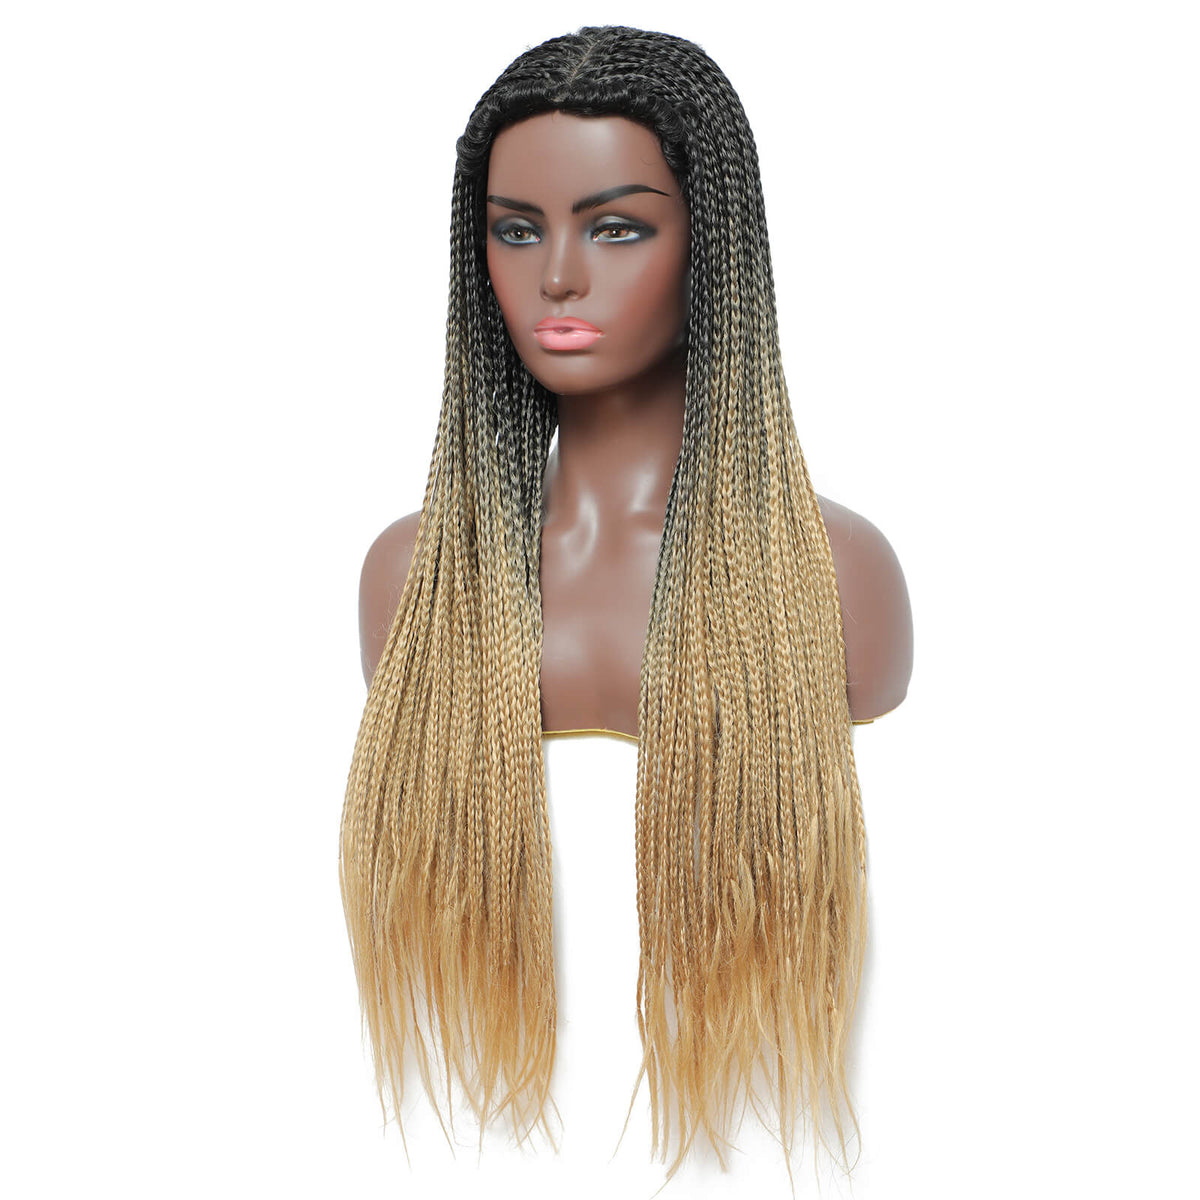 Rosebony Box Braided Wigs for Black Women 24 Inch Ombre Blonde Braids Front Side Show